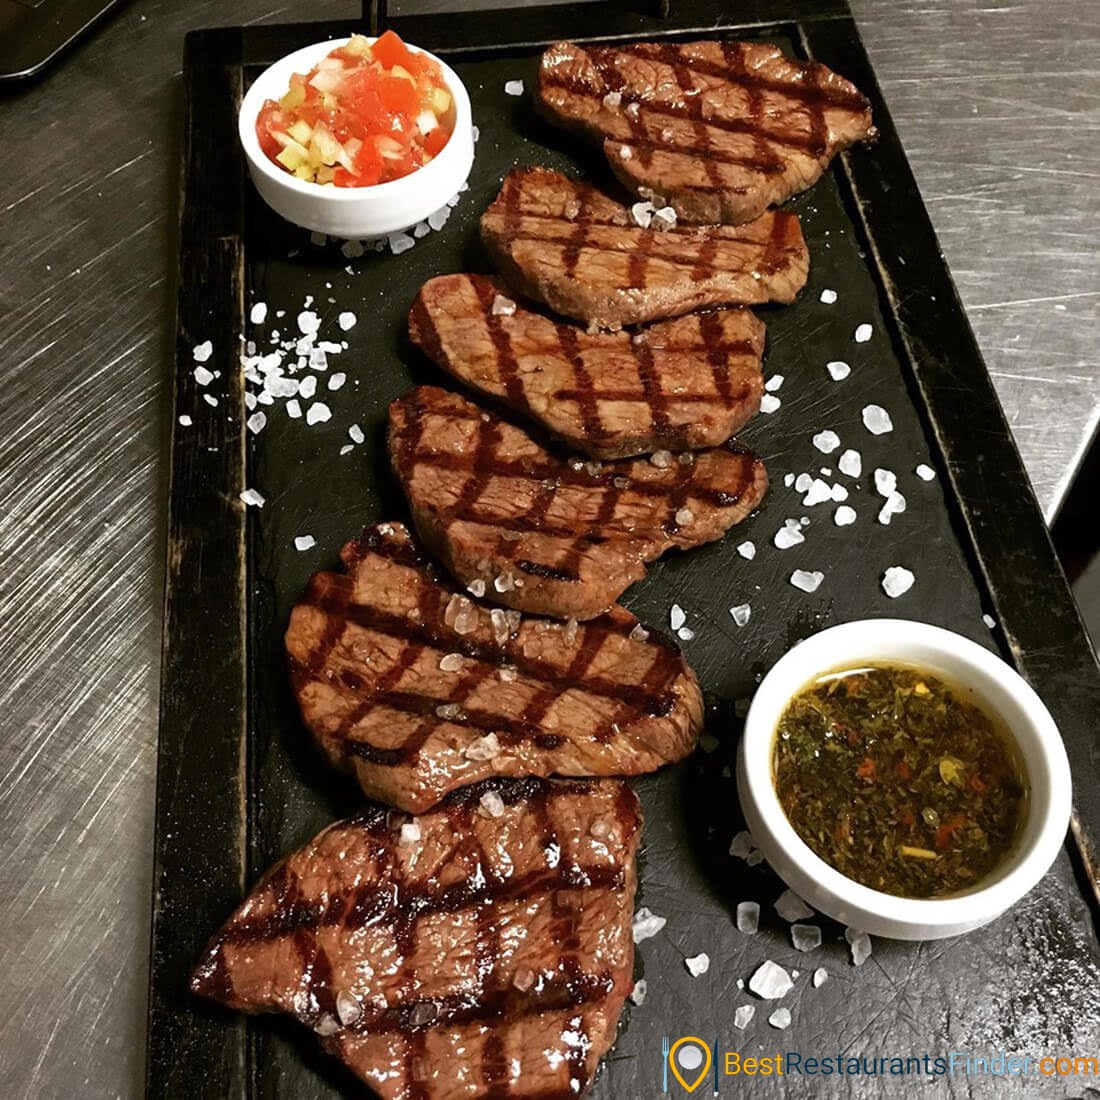 Picanha meat and more